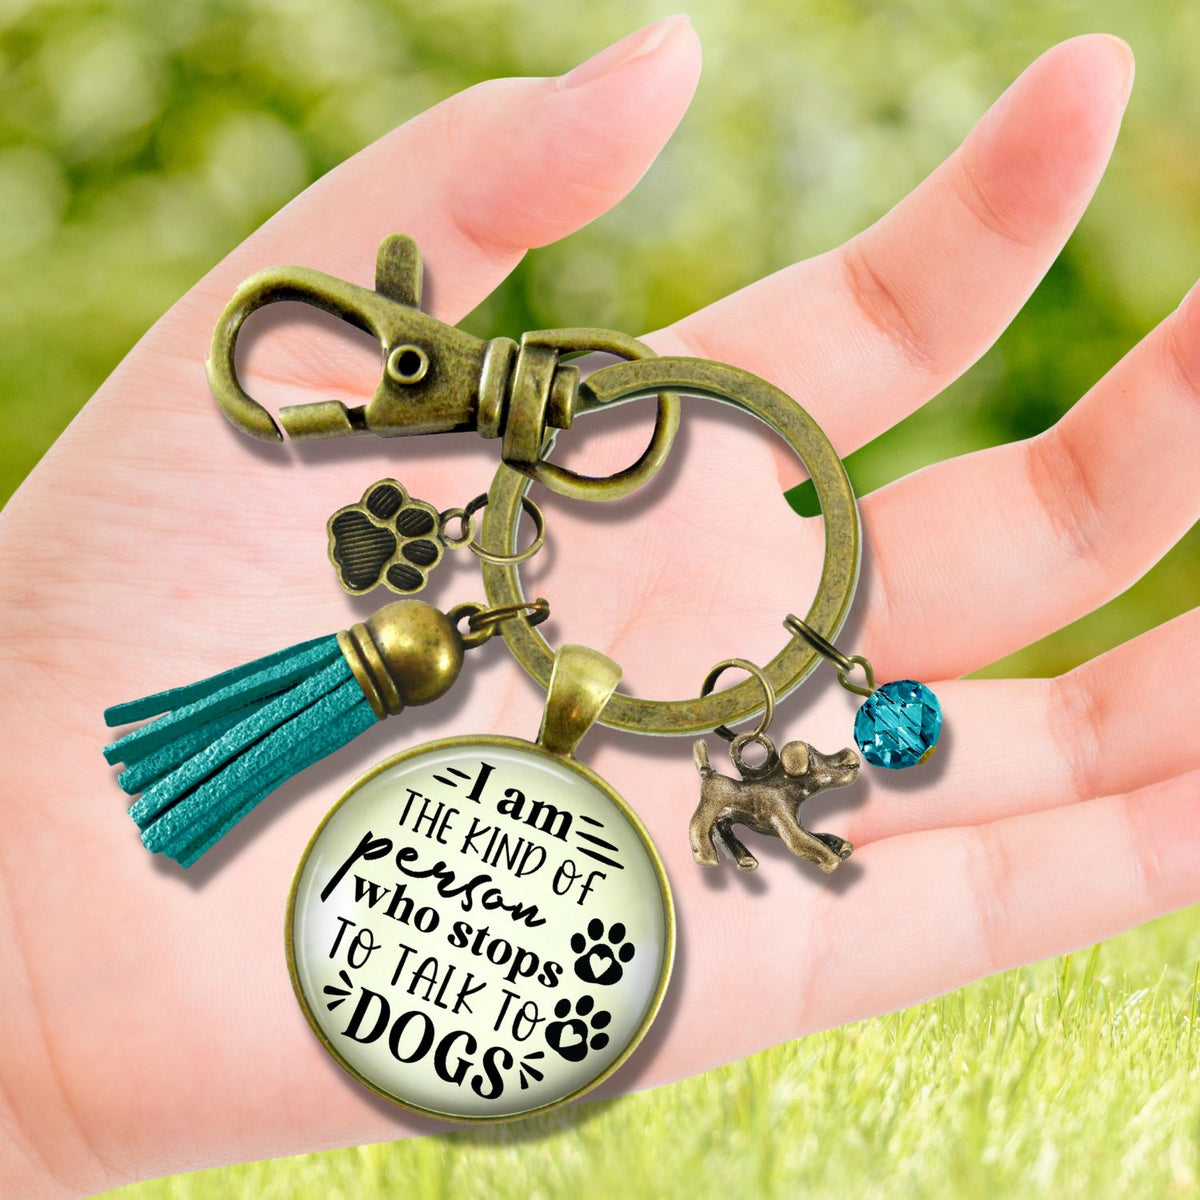 Handmade Gutsy Goodness Jewelry I Am The Kind Of Person Who Stops To Talk To Dogs Keychain Pet Lover Jewelry, Tassel Charm, Card